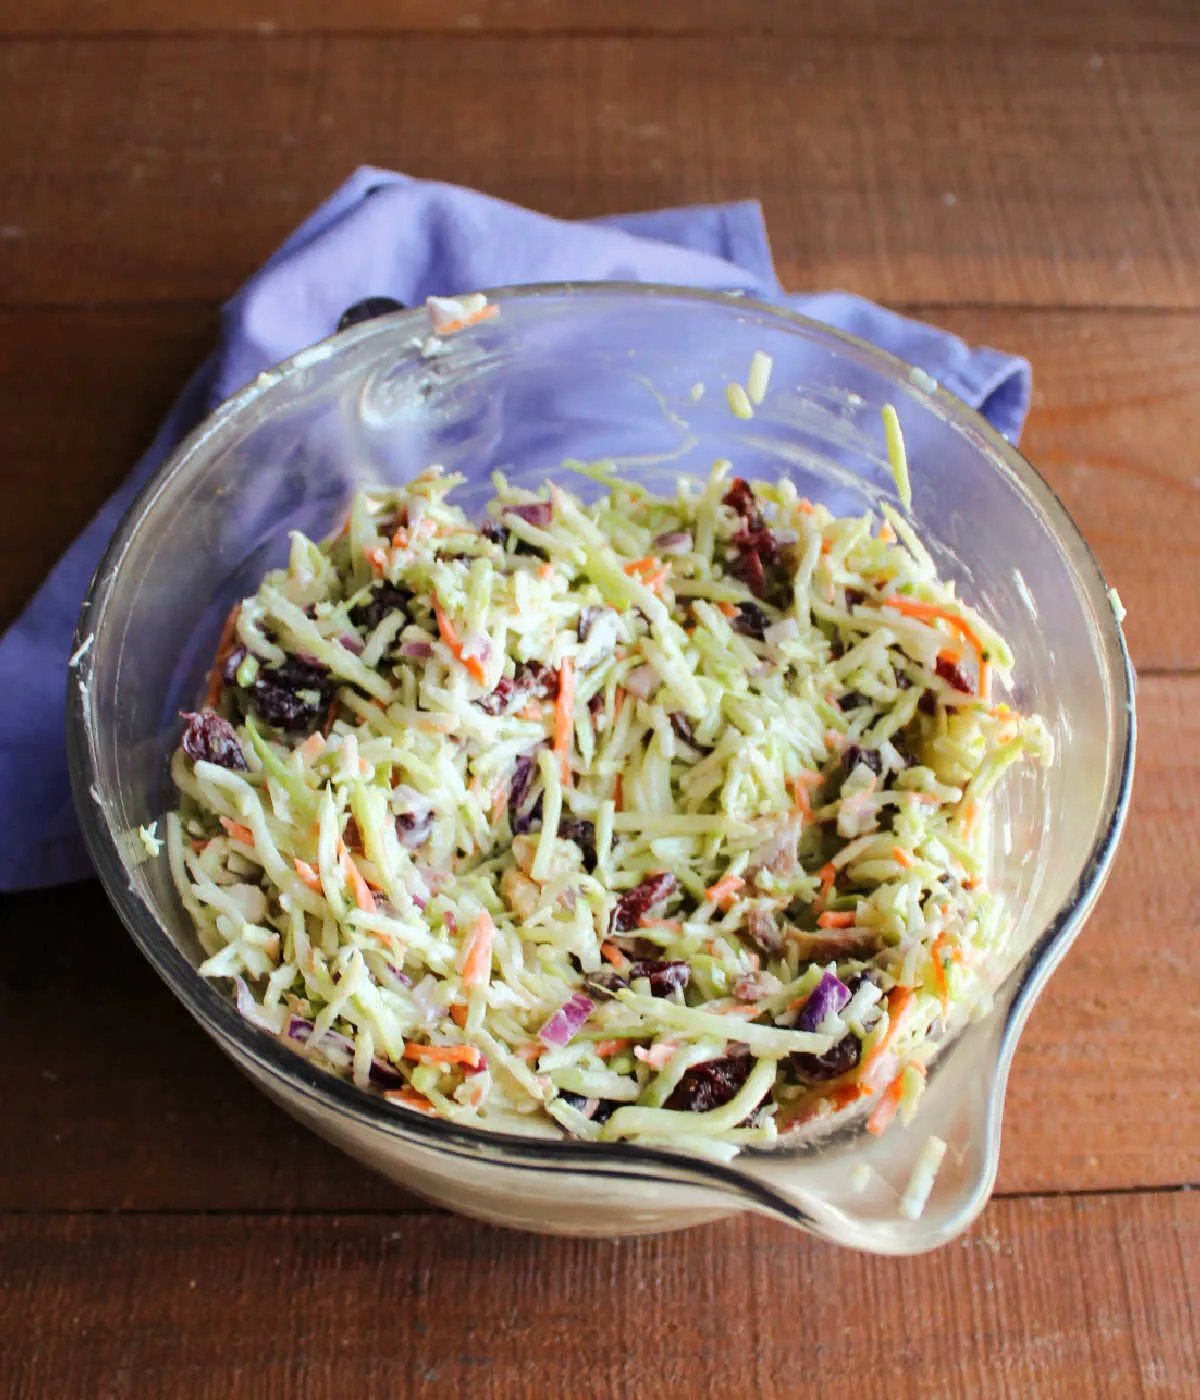 Broccoli slaw after chilling for a couple of hours, looking softer, more dressed, and ready to eat.